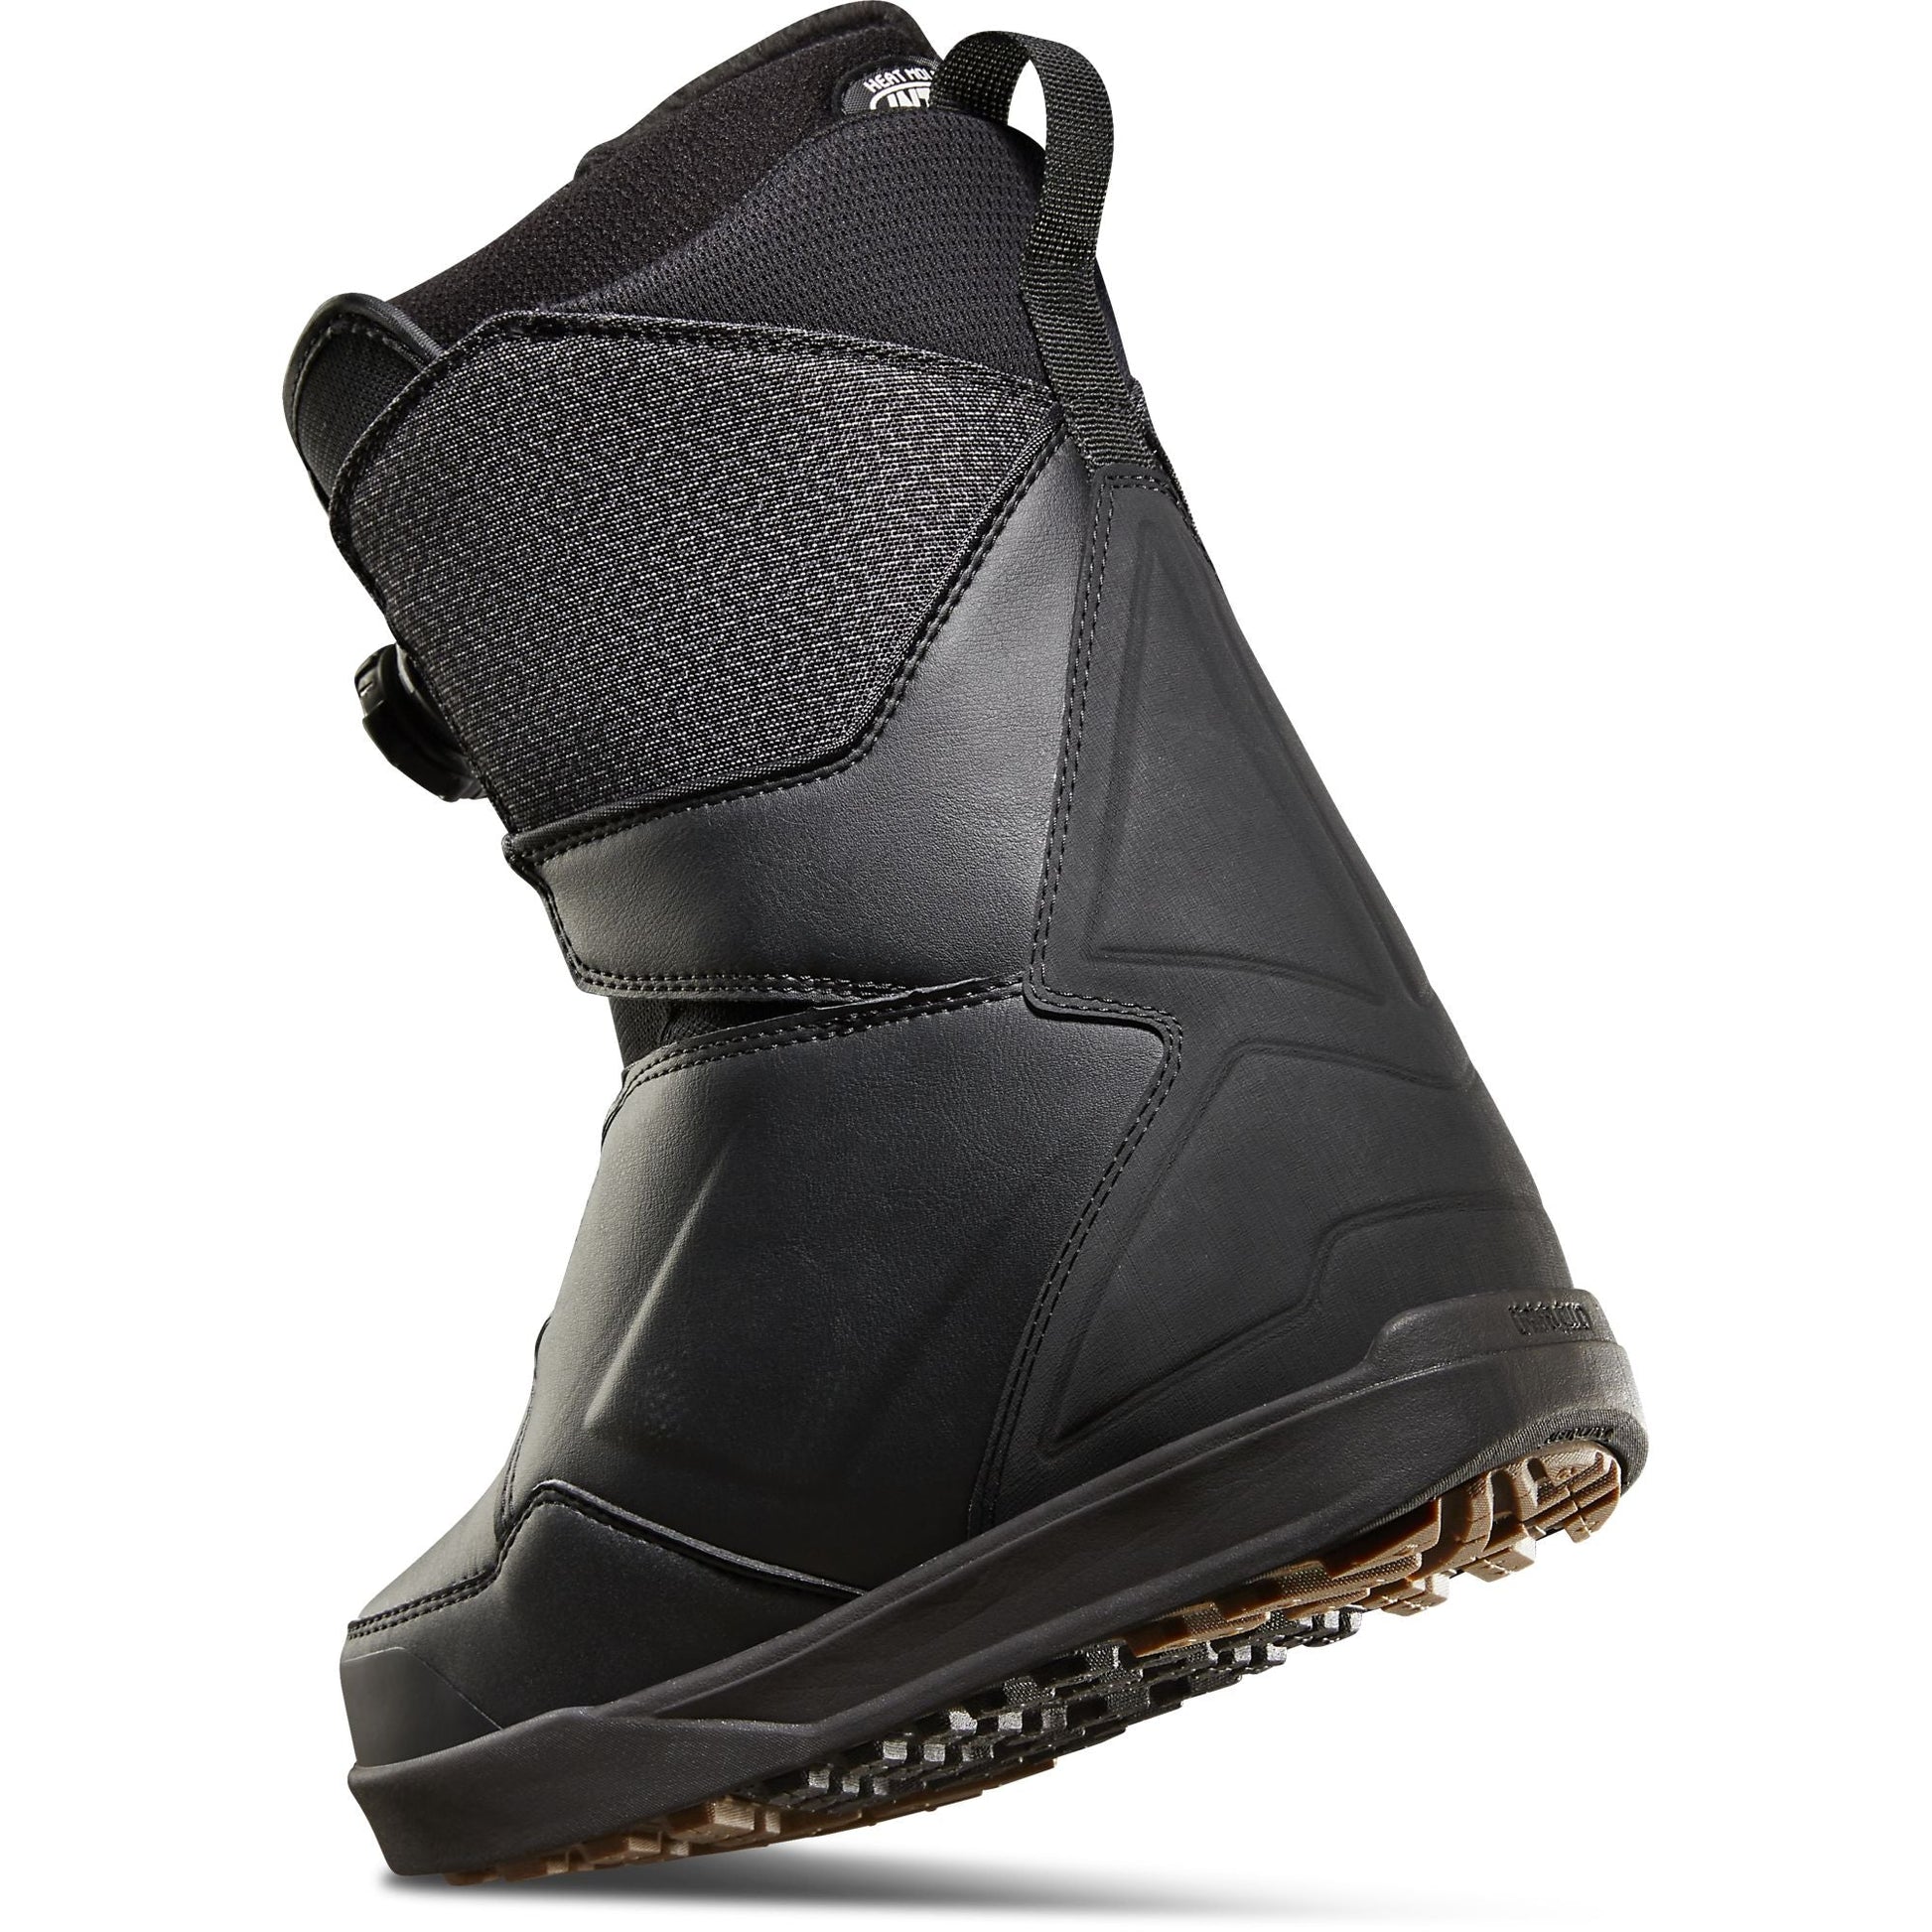 ThirtyTwo Women's Lashed Double BOA Snowboard Boots - Openbox Snowboard Boots